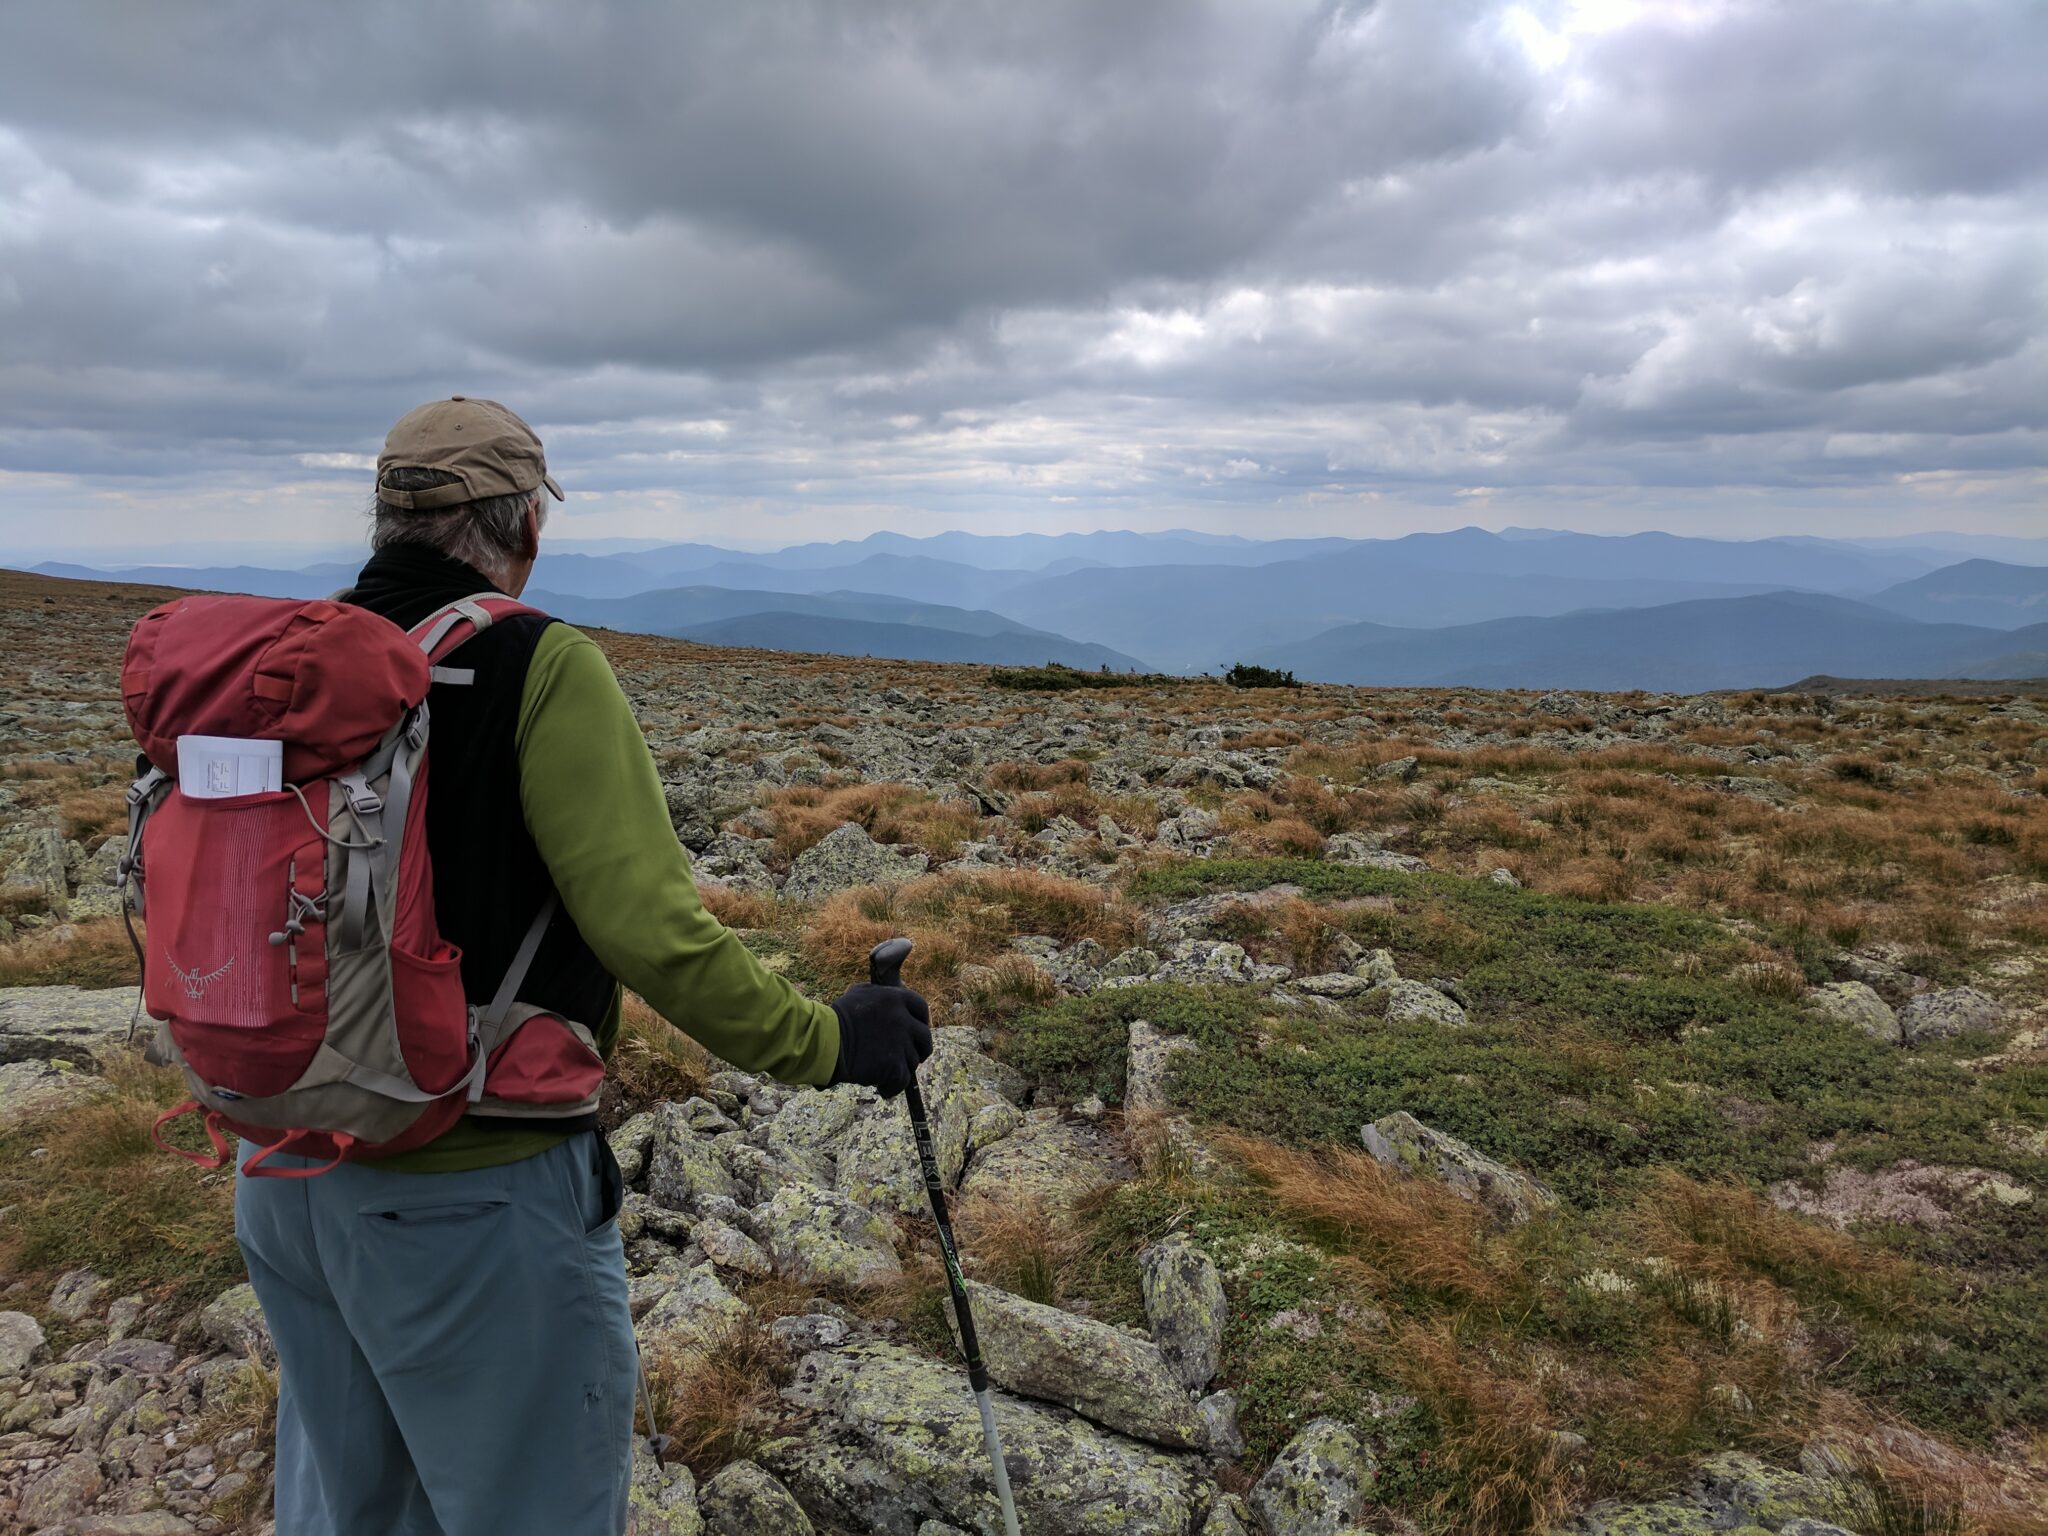 Courtesy of George BrownBrown taking in the views while on a hike in the White Mountain National Forest. A new trail sign for the Davis Path sits in his pack.